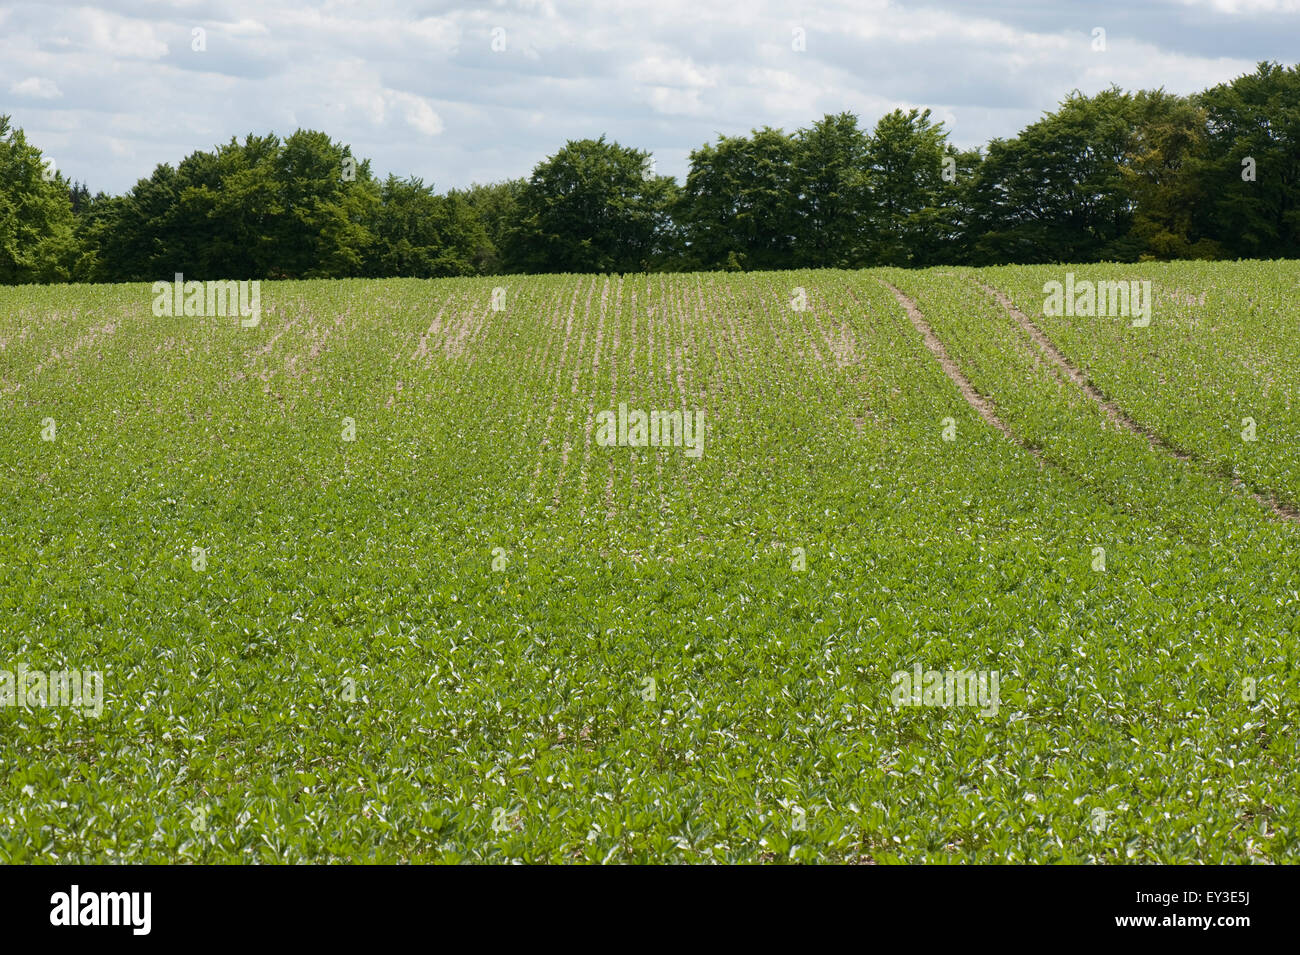 Young crop of field beans sown in minimal cultivation on downland soil, Berkshire, June Stock Photo